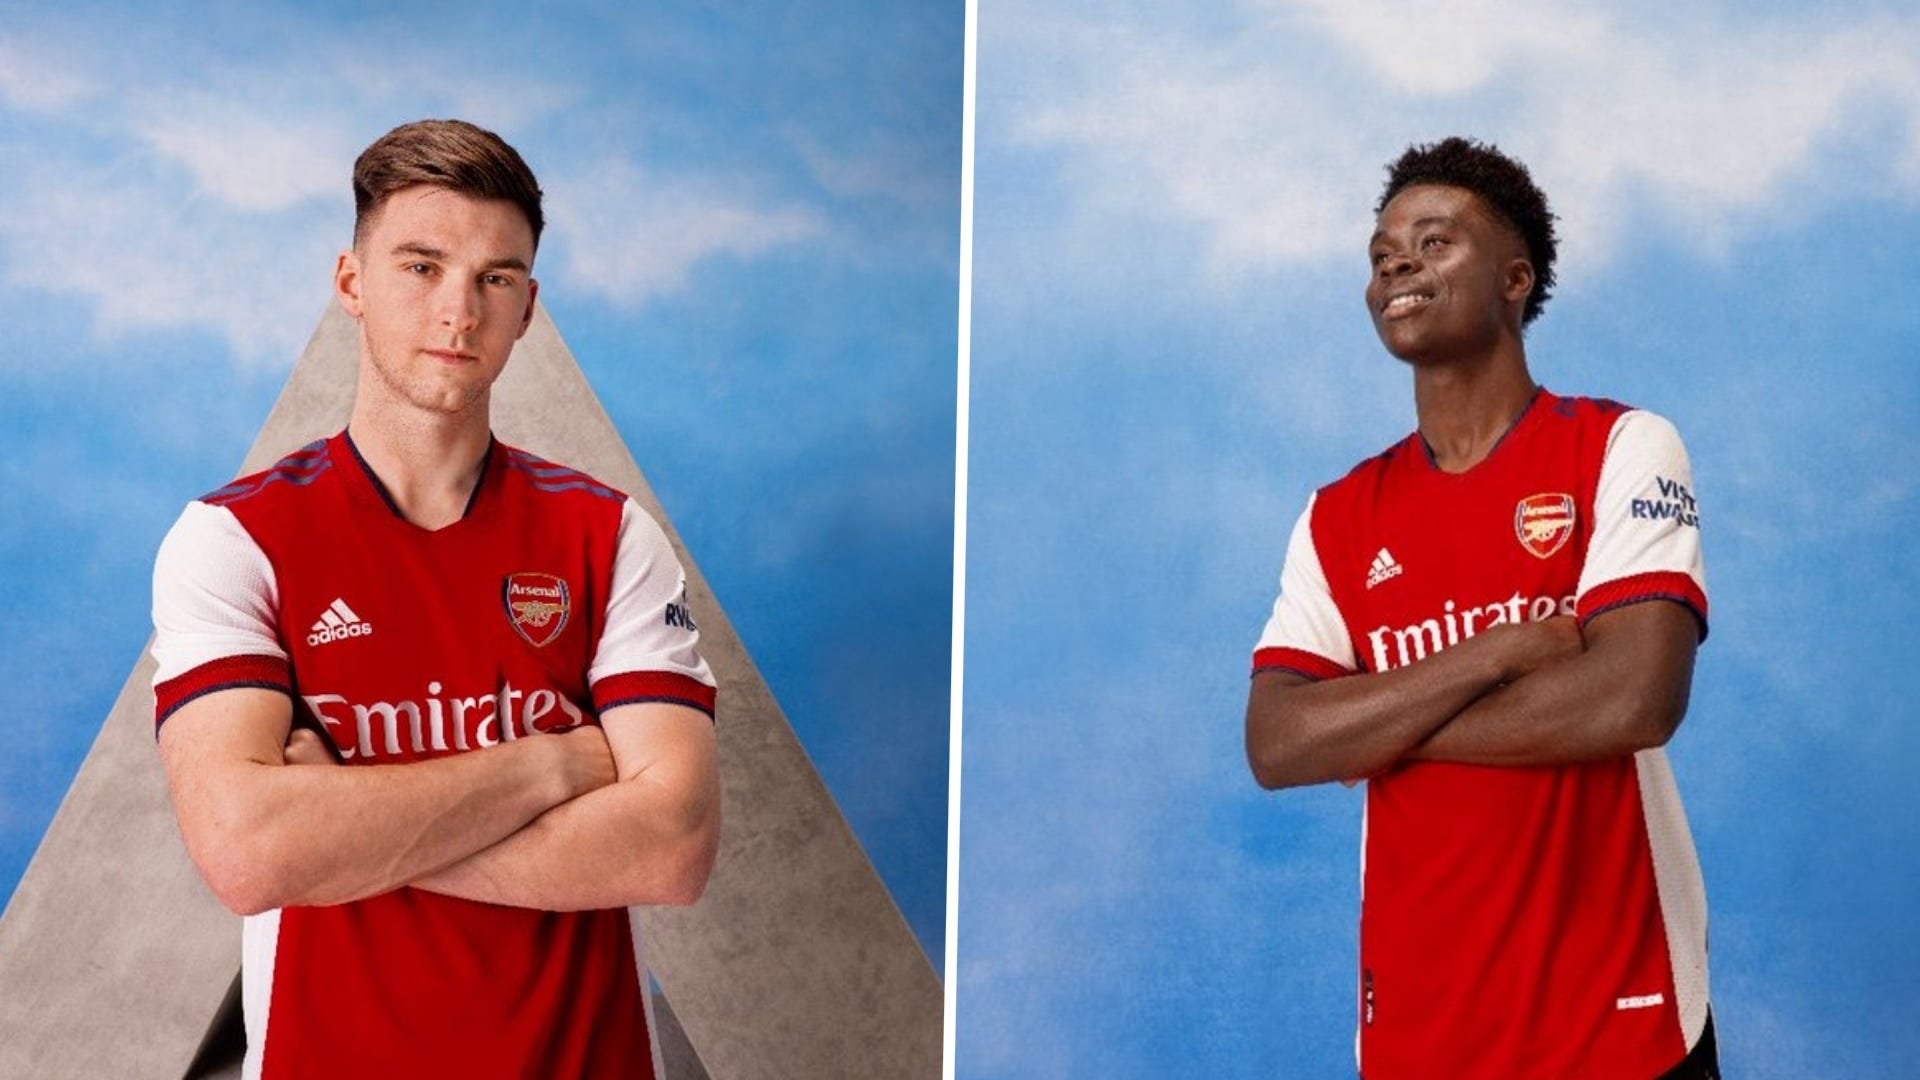 Rumoured away kits for Arsenal and Celtic have leaked and they're very tidy  